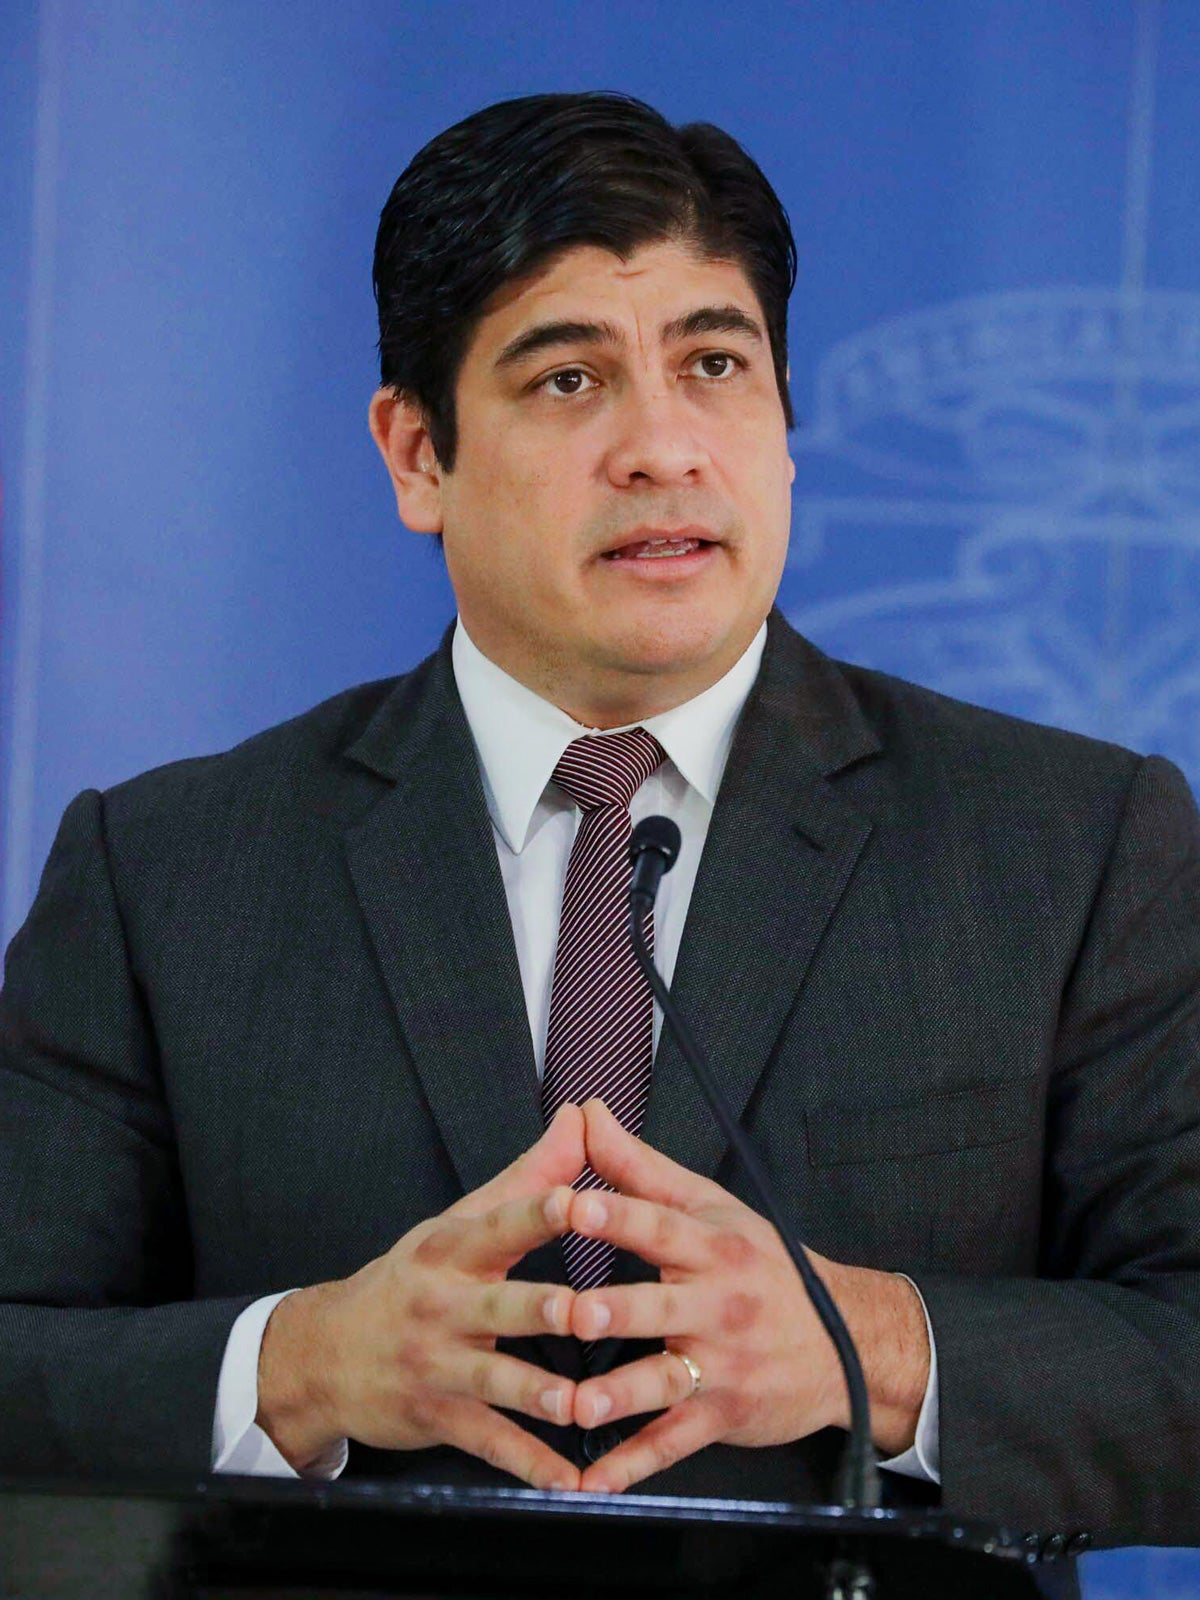 Carlos-Alvarado-Quesada speaks at a podium with his hands tented. He wears a dark suit and tie and is in front of a blue background.